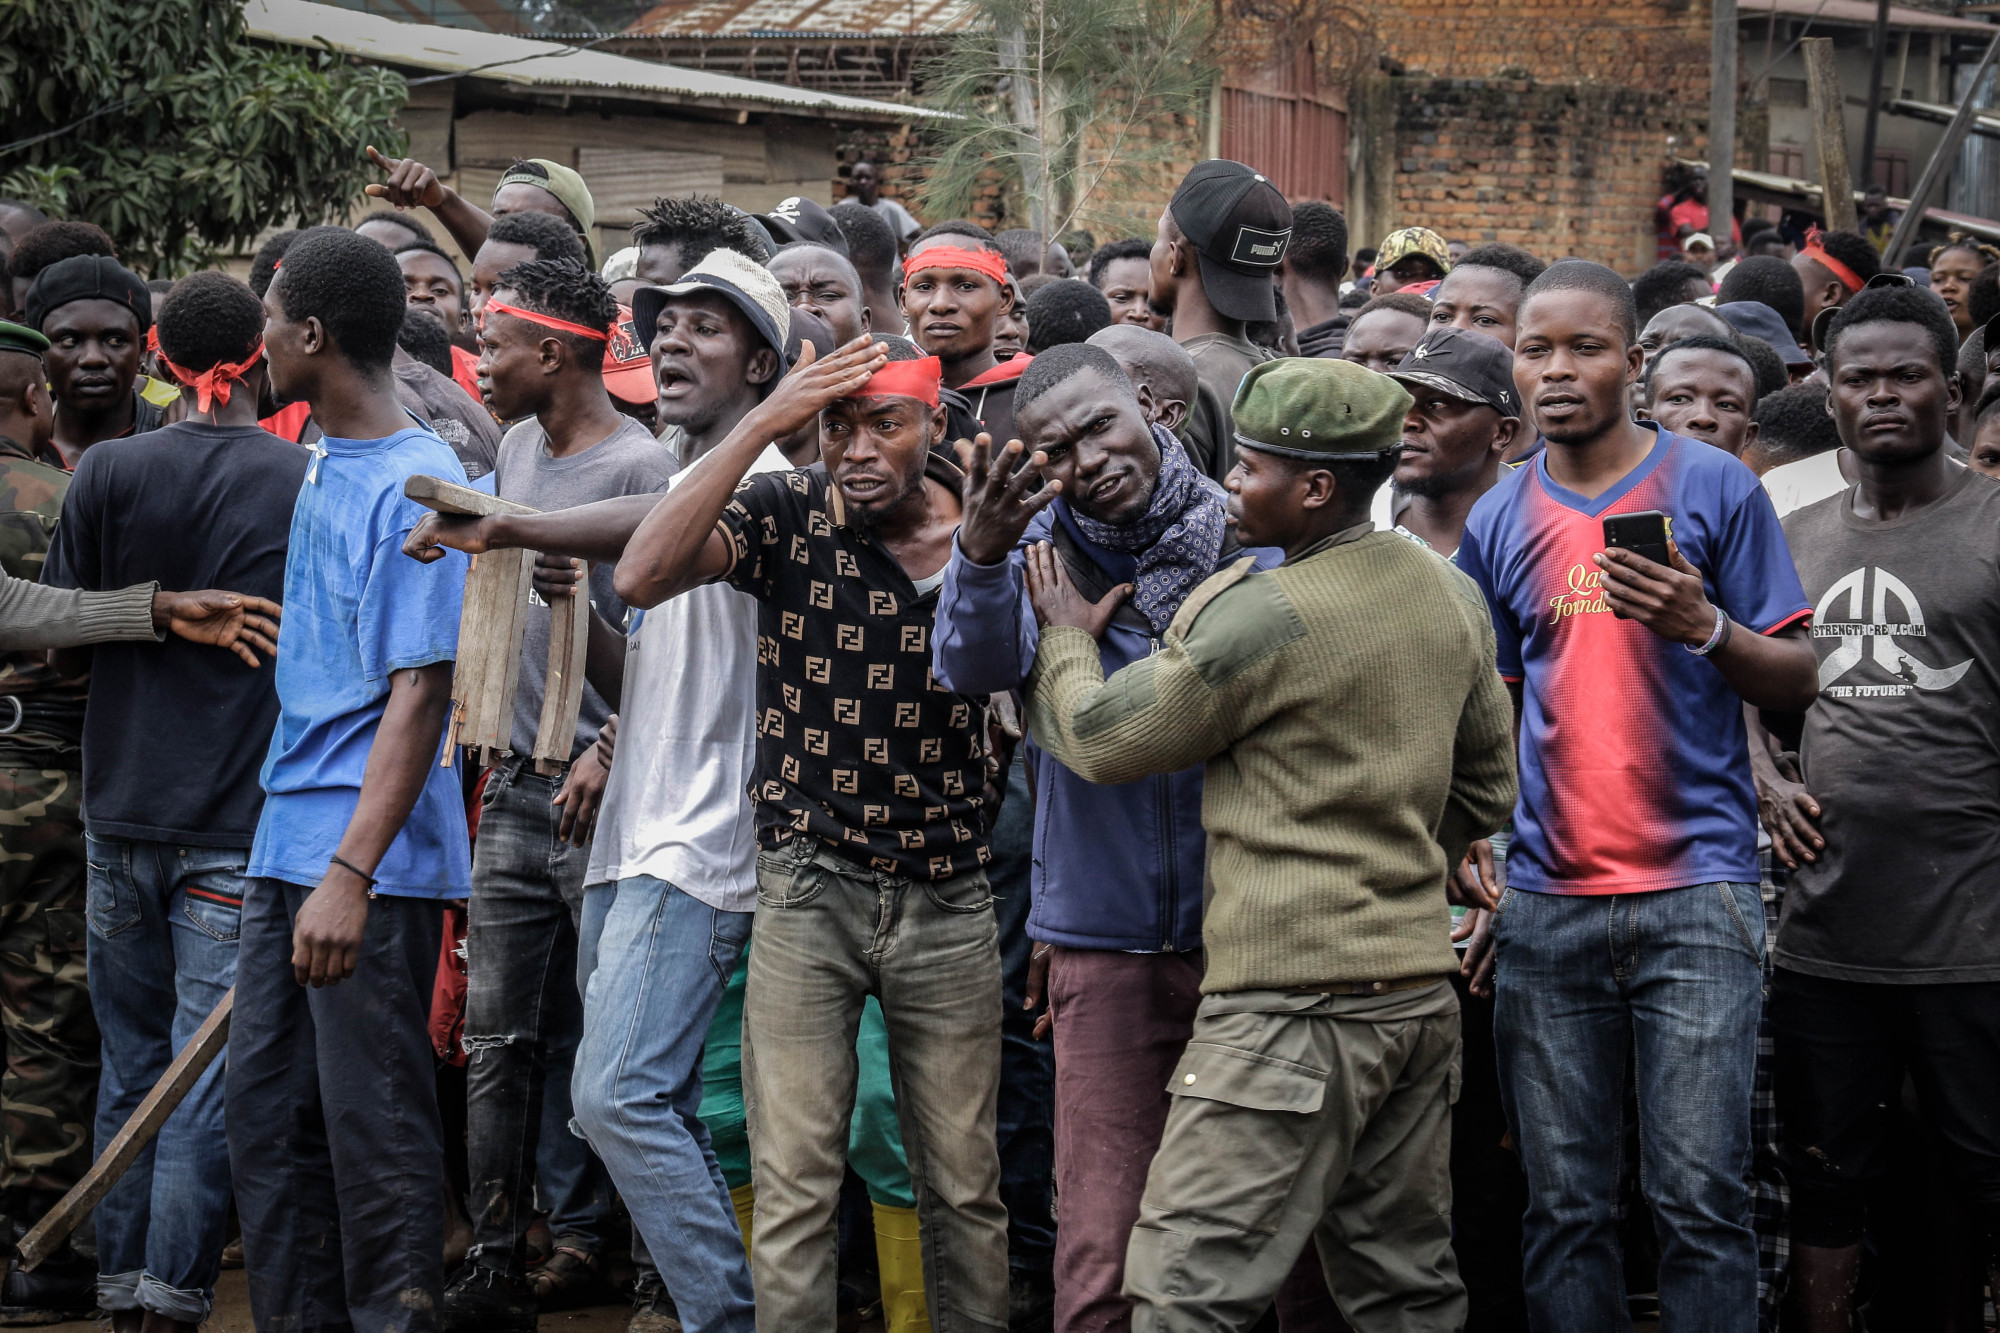 Bunia, DRC, September 4, 2020. A crowd of youths express their anger after 100 heavily armed militiamen entered the eastern Congolese city of Bunia last Friday. Some youths wore red headbands to distinguish themselves from the CODECO fighters who wore white headbands. © Dieudonné Dirole for Fondation Carmignac